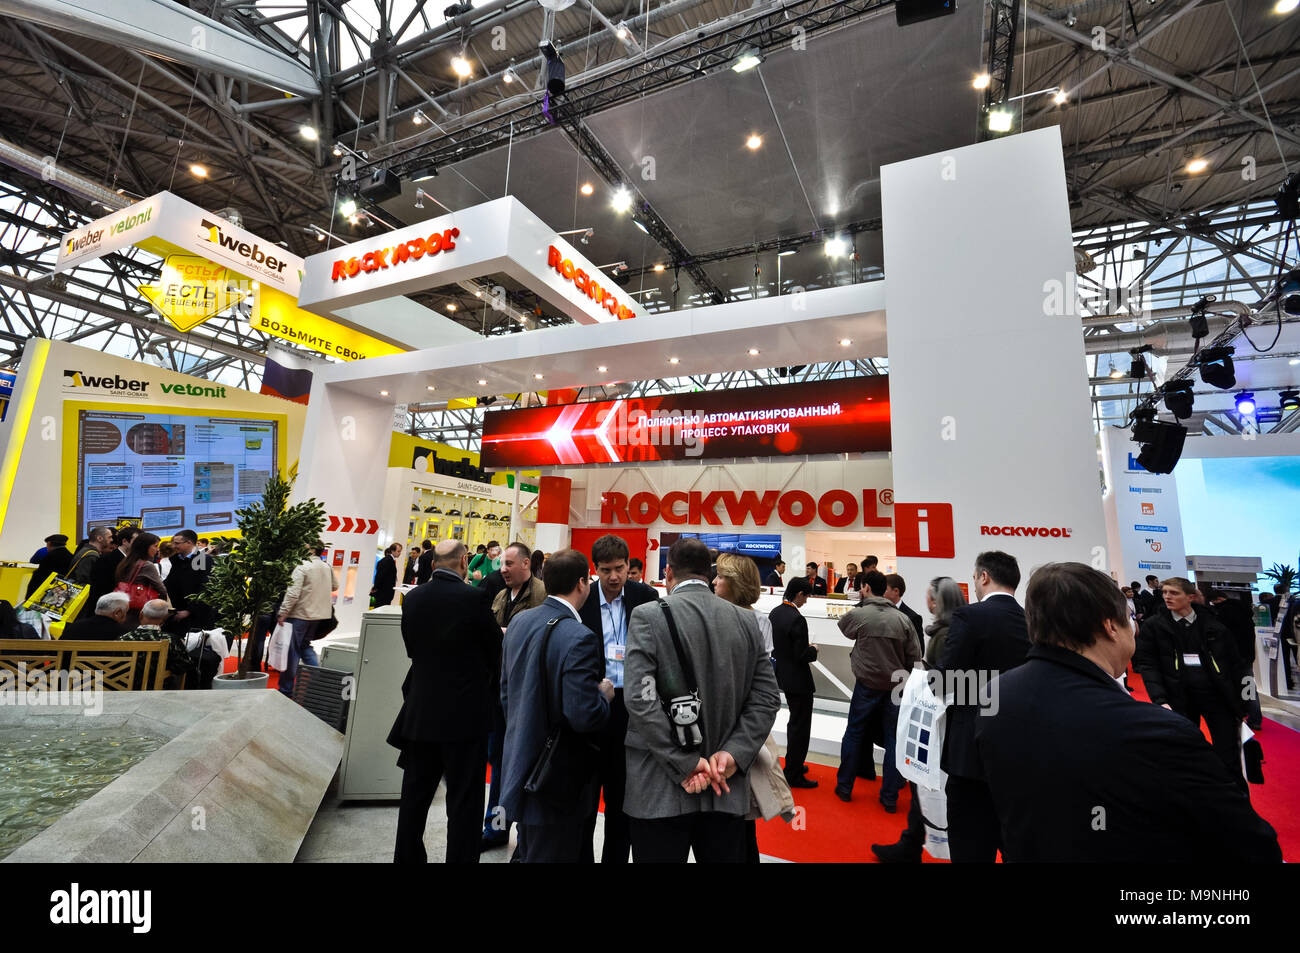 Rockwool booth at MosBuild 2012 Exhibition, april, 11 2012, Moscow, Russia Stock Photo